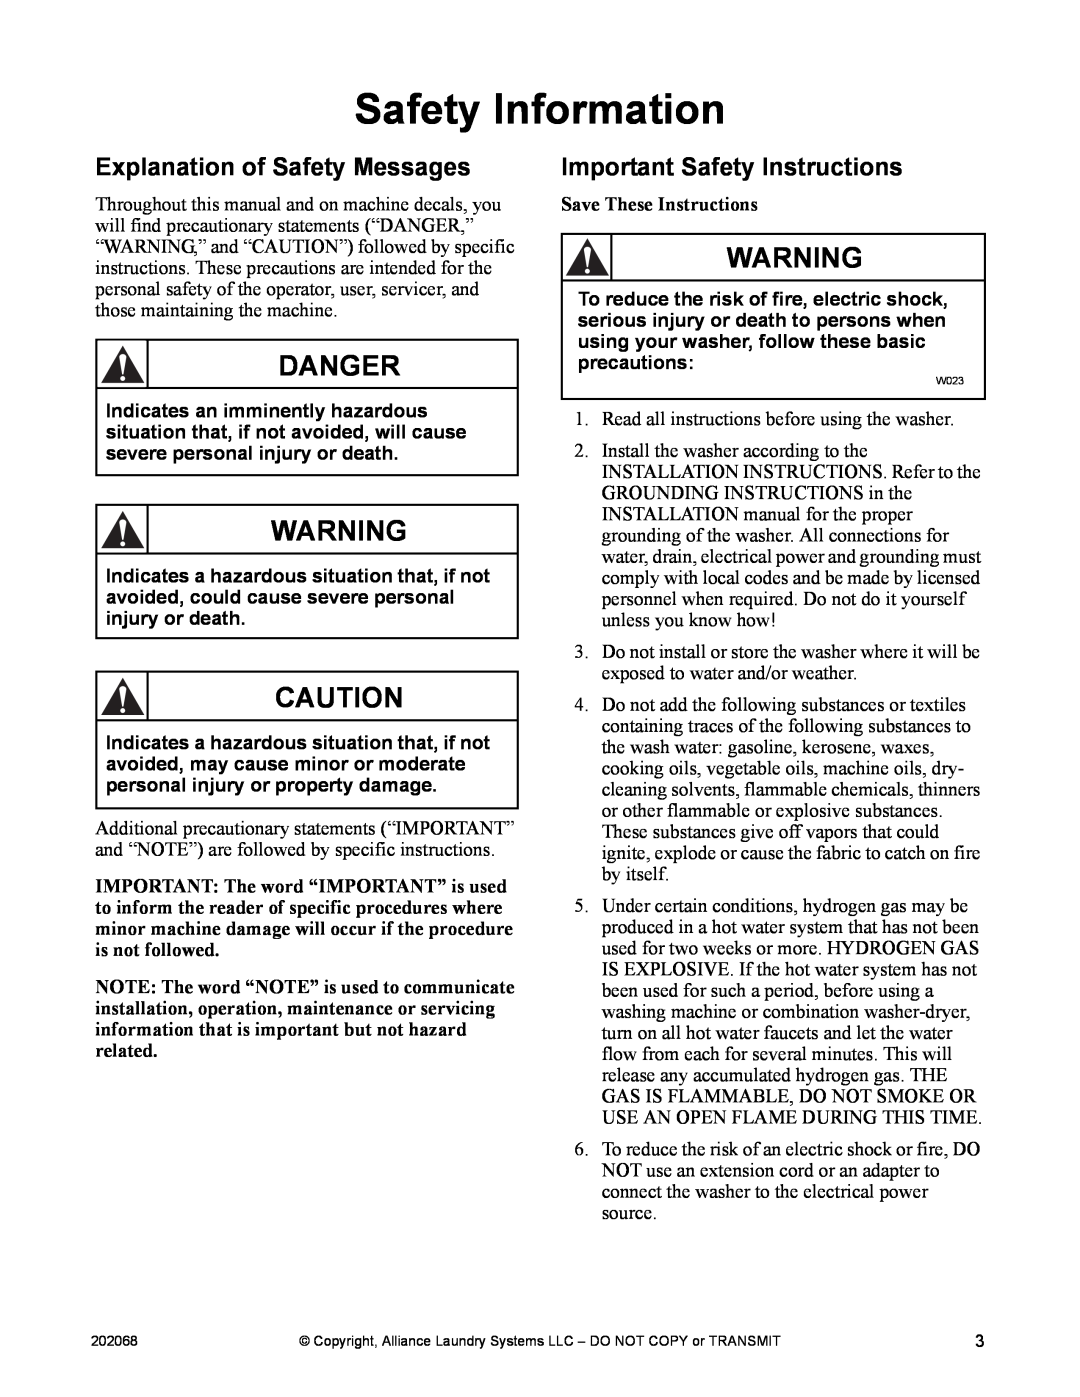 Alliance Laundry Systems TLW12CTLW12C Safety Information, Explanation of Safety Messages, Important Safety Instructions 